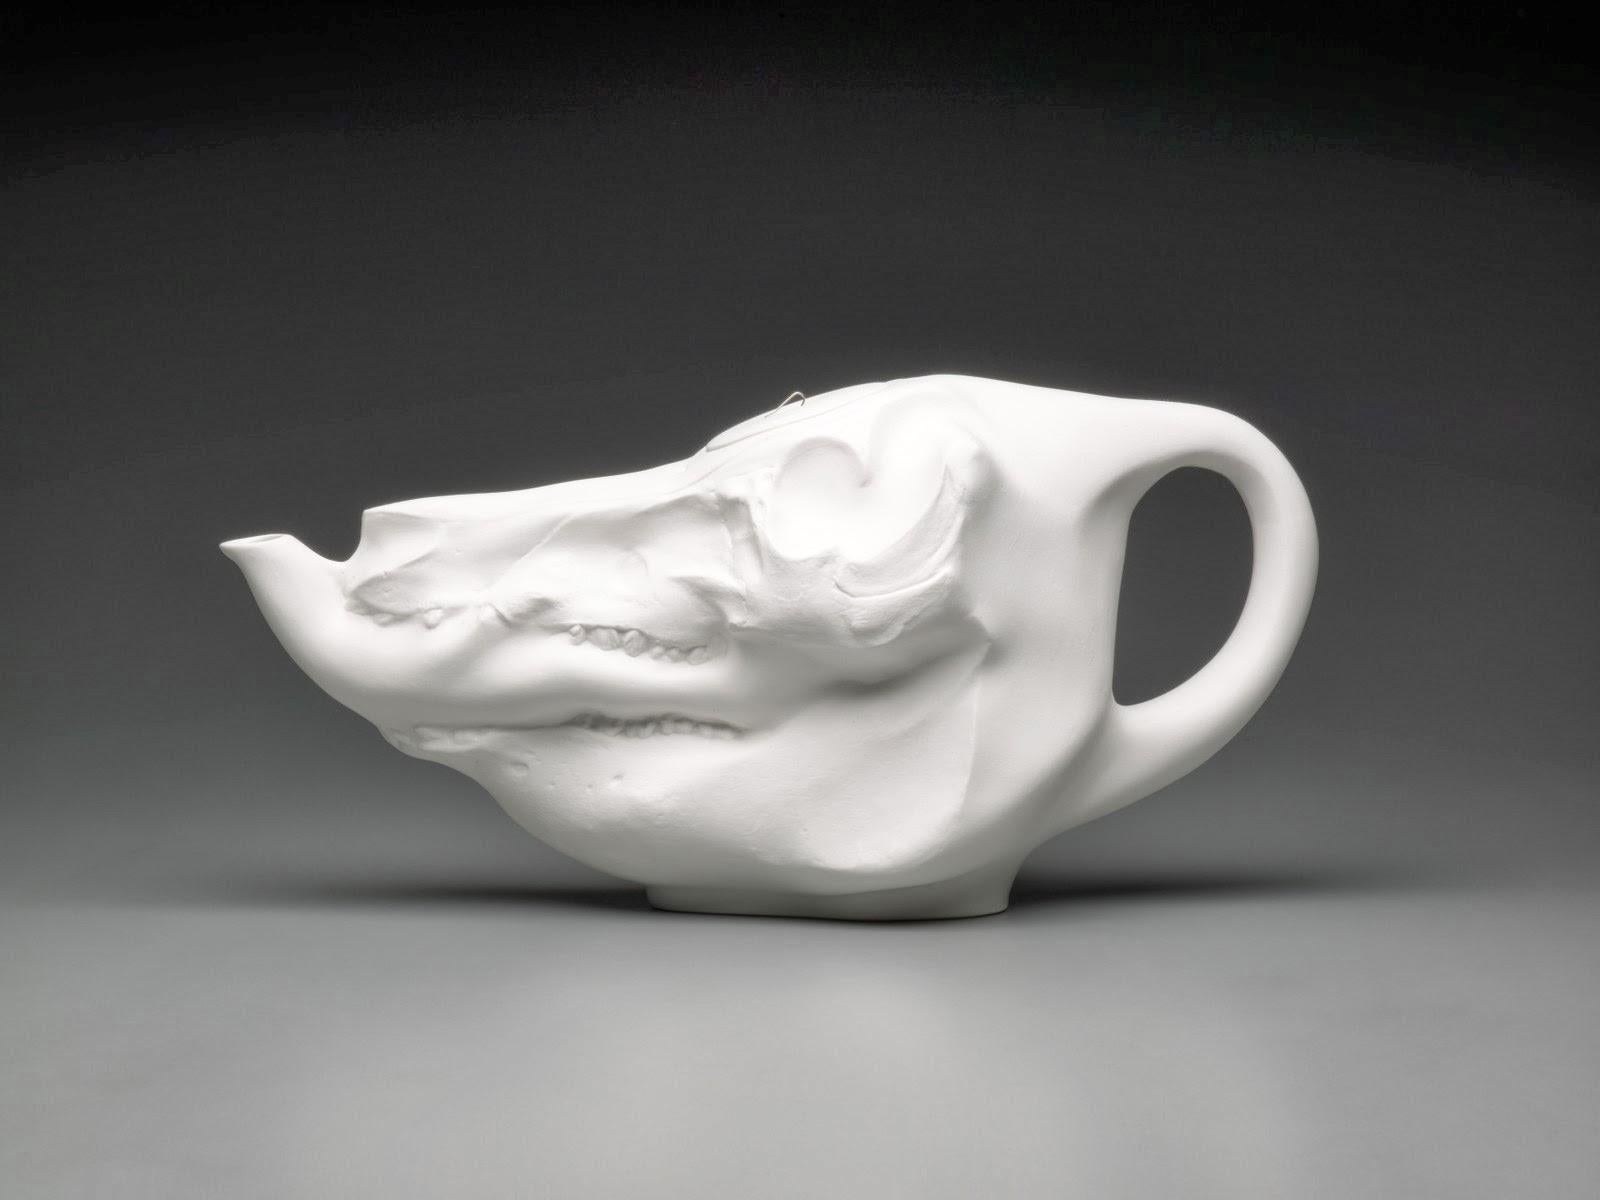 This daring, contemporary design classic turns the polite activity of tea drinking on its head. The Rotterdam-based Studio Weiki Somers—one of today’s brightest and most poetic design stars—surprises us by modeling a teapot on the shape of a pig’s